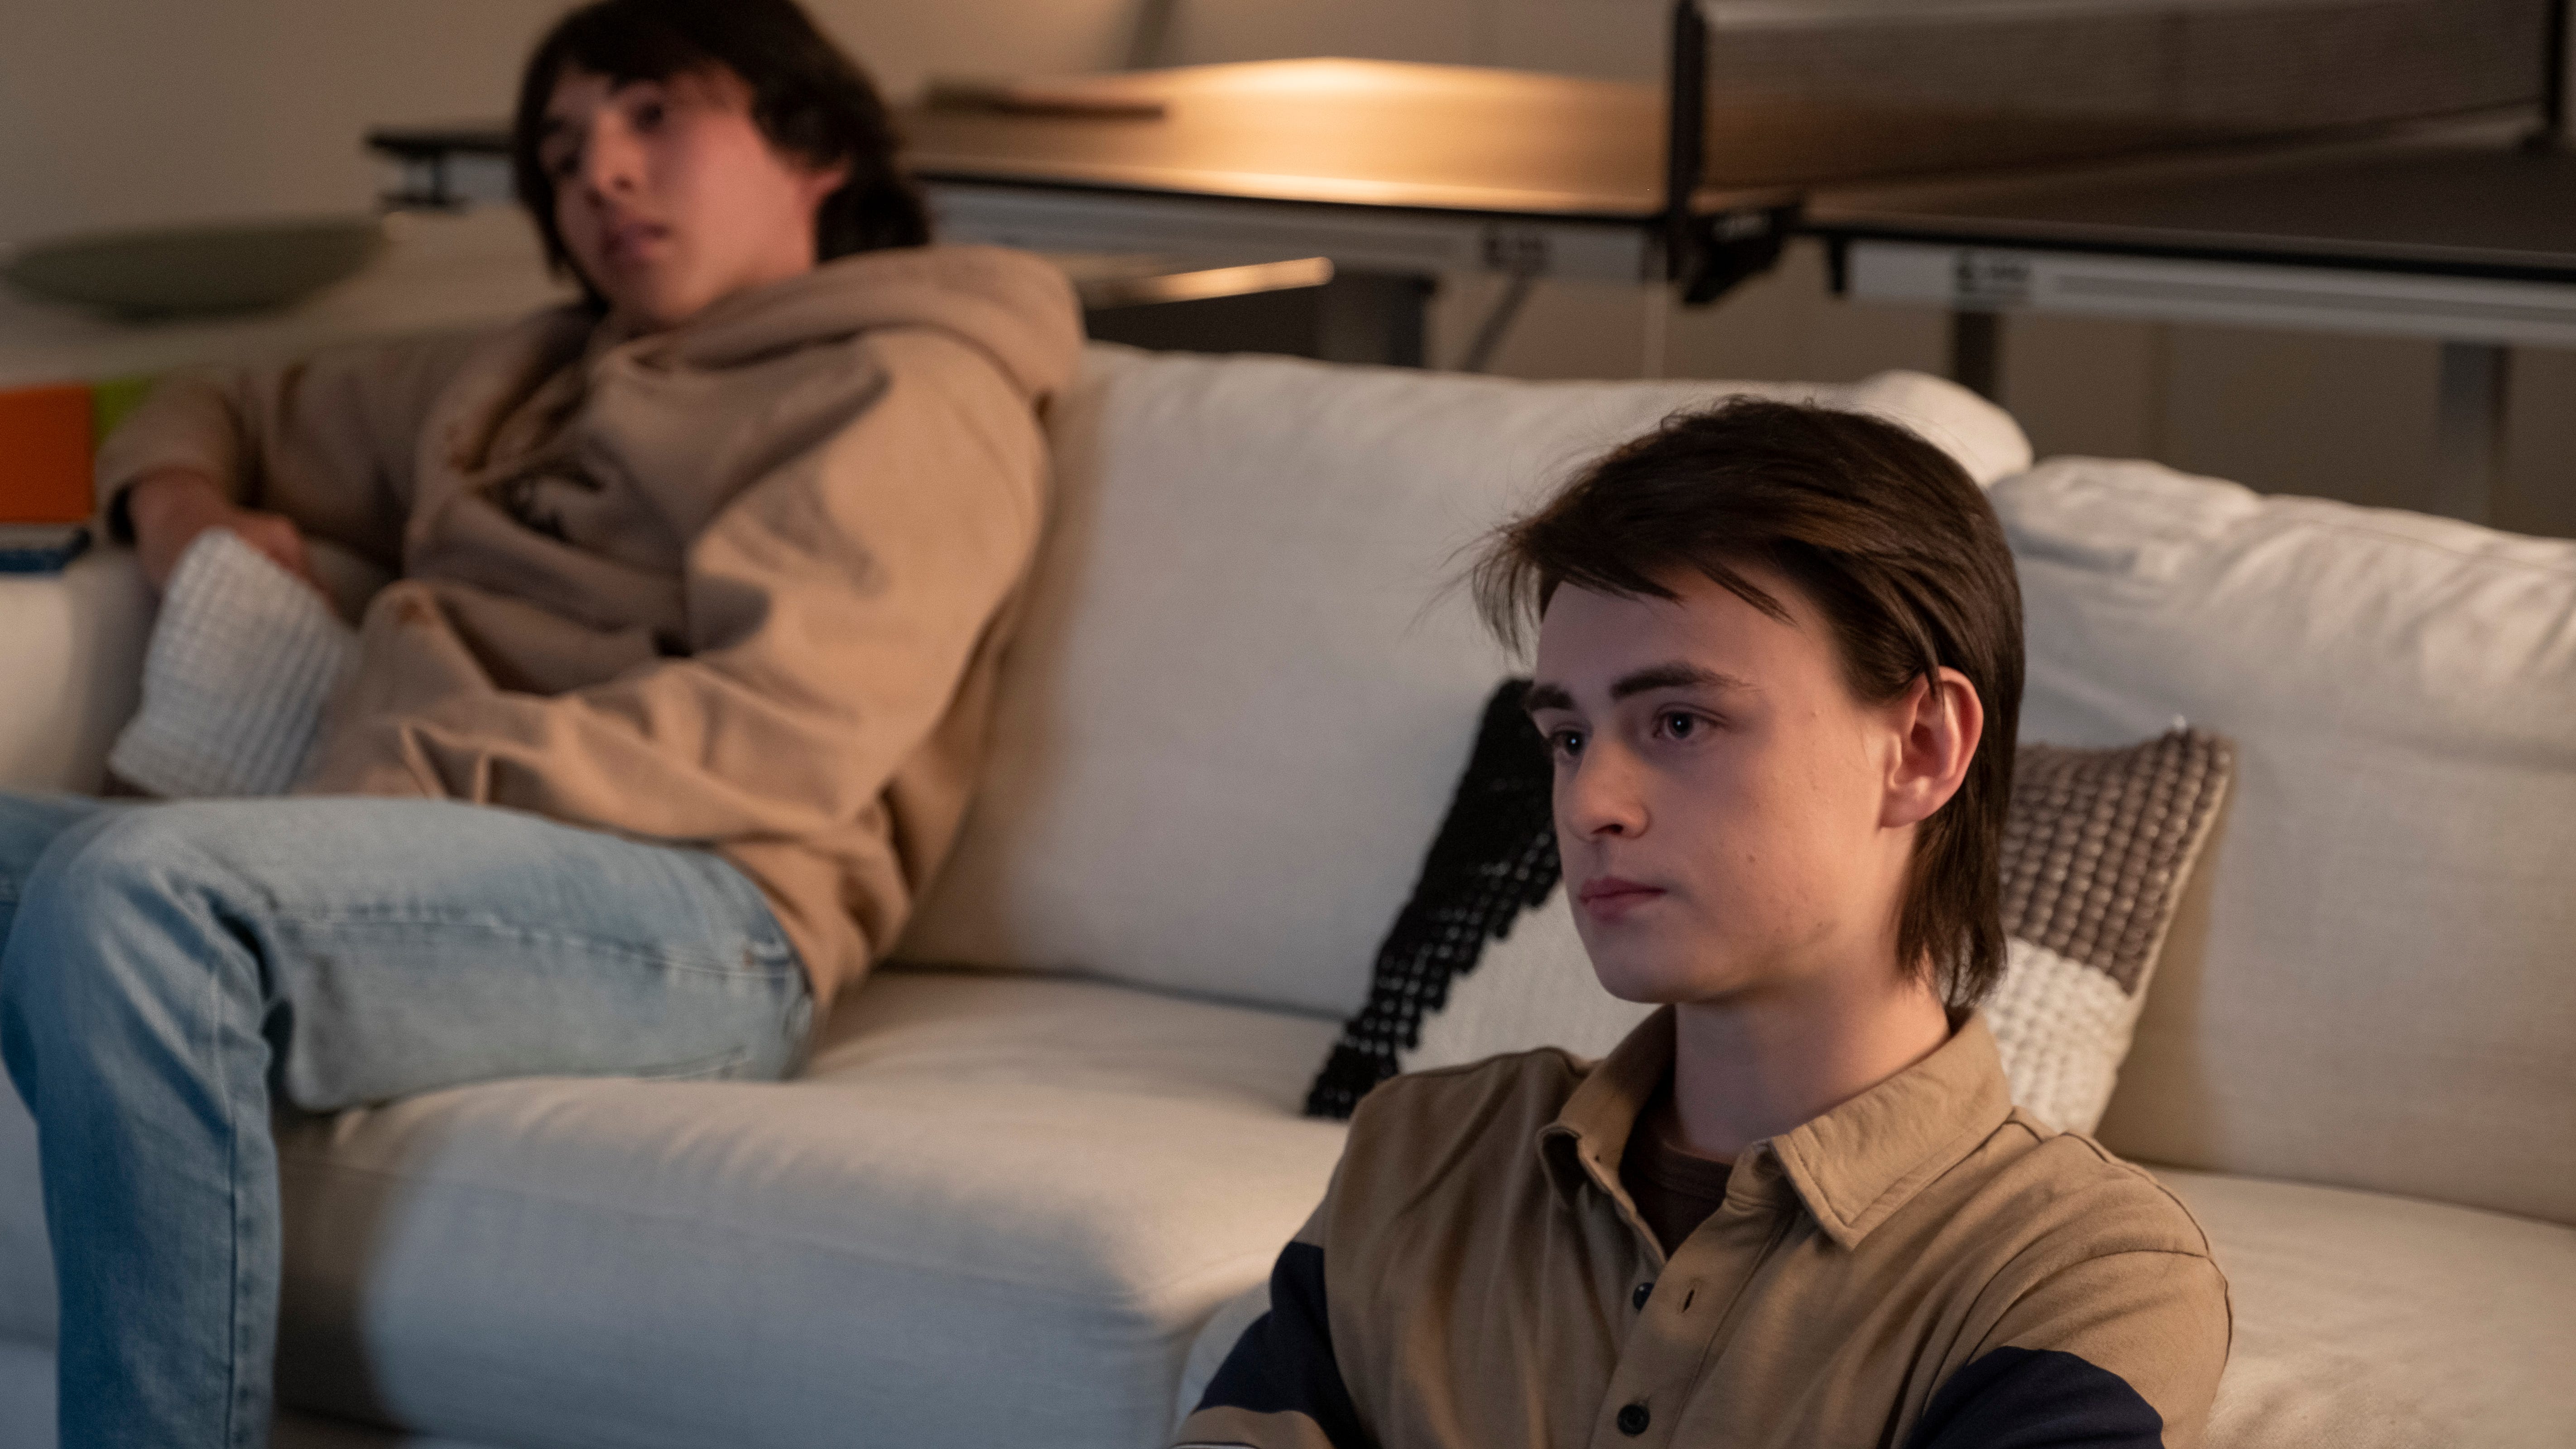 Barry Berkman's grown son John (Jaeden Martell) watches "The Mask Collector," a movie distorting his father's real history.